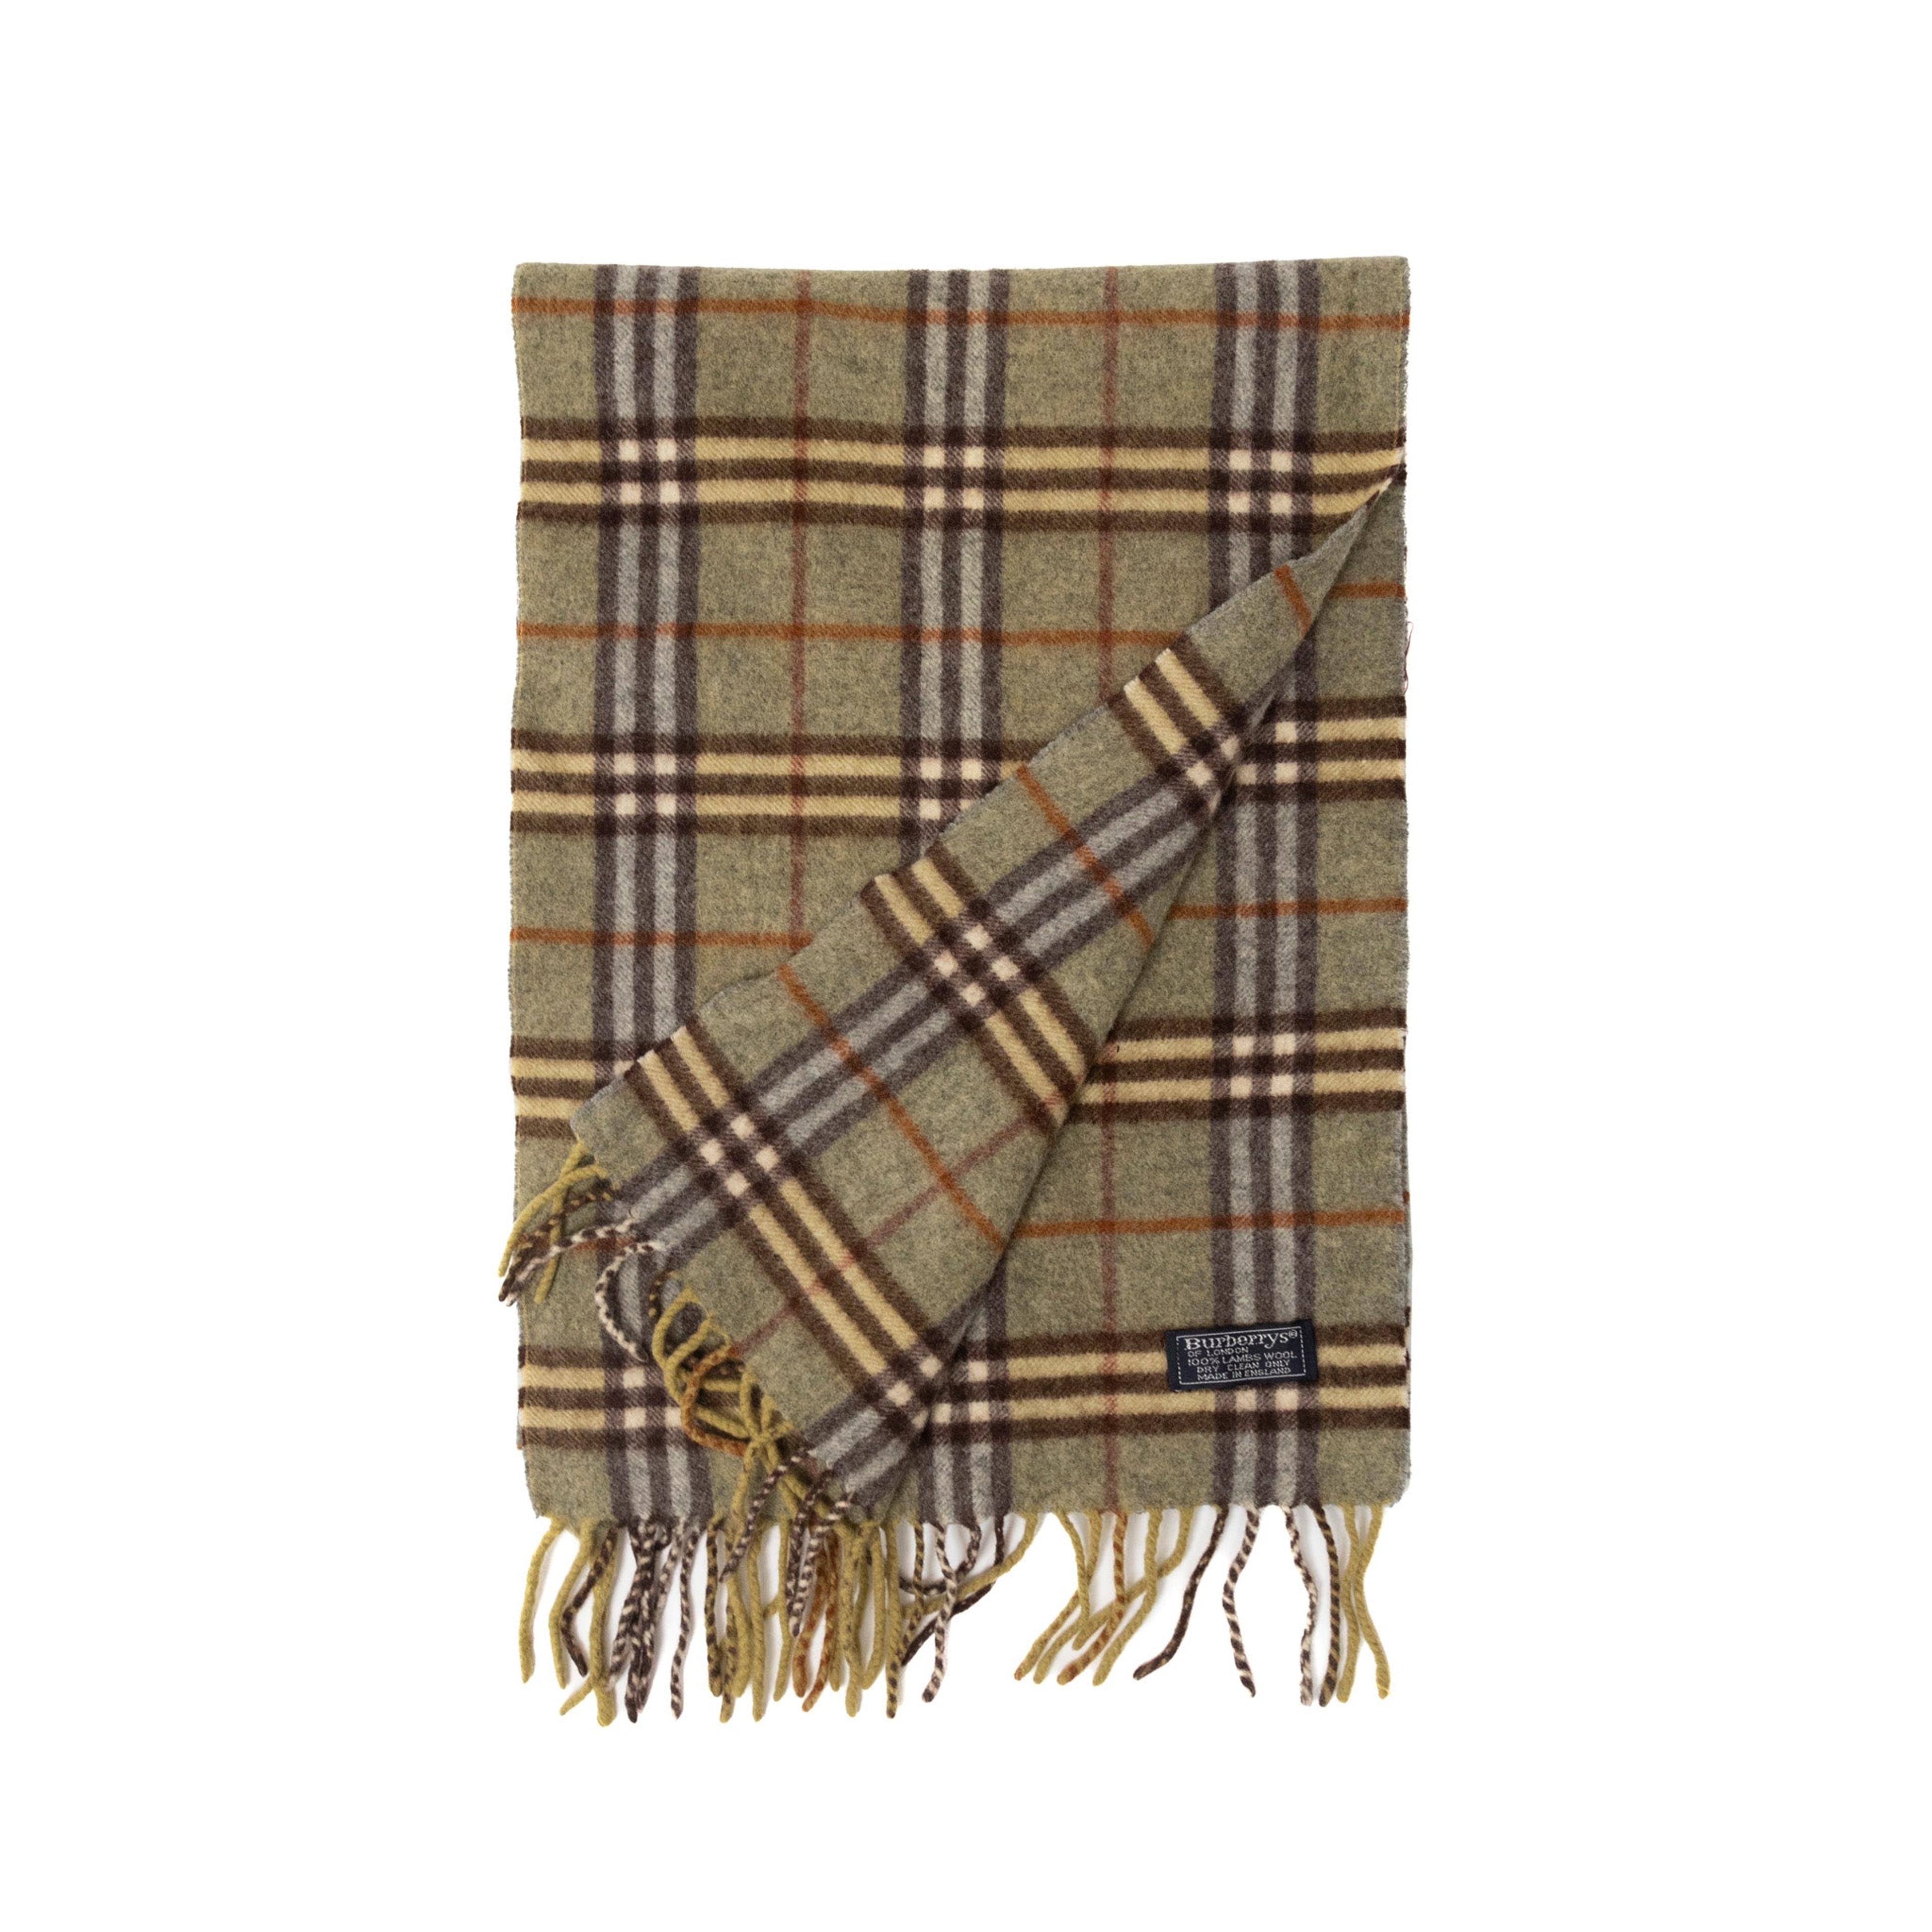 Alternate View 2 of Olive Green Nova Check Wool Burberry Scarf